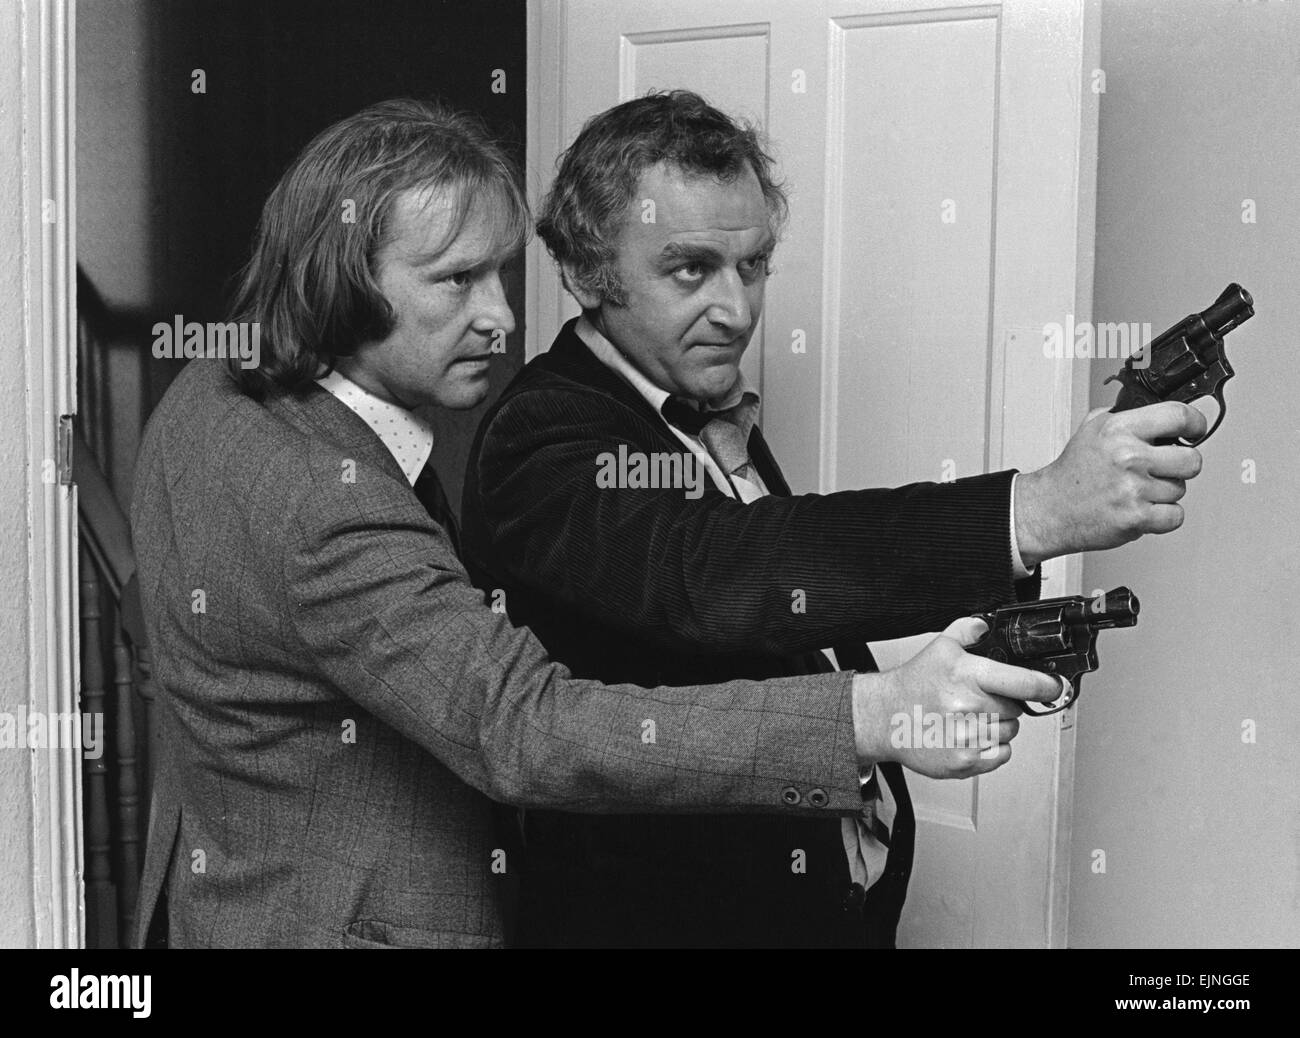 Detective Sergeant George Carter (left played by Dennis Waterman) and Detective Inspector John 'Jack' Regan (right played by John Thaw) seen here during rehearsals before a take on the set of the Euston Films TV series The Sweeney. The series focuses on the Flying Squad, a branch of the Metropolitan Police tasked with tackling armed robbery and violent crime in London. The programme's title derives from Sweeney Todd, which is Cockney rhyming slang for 'Flying Squad'. 8th December 1975 *** Local Caption *** Planman - - 02/07/2010 - - Stock Photo